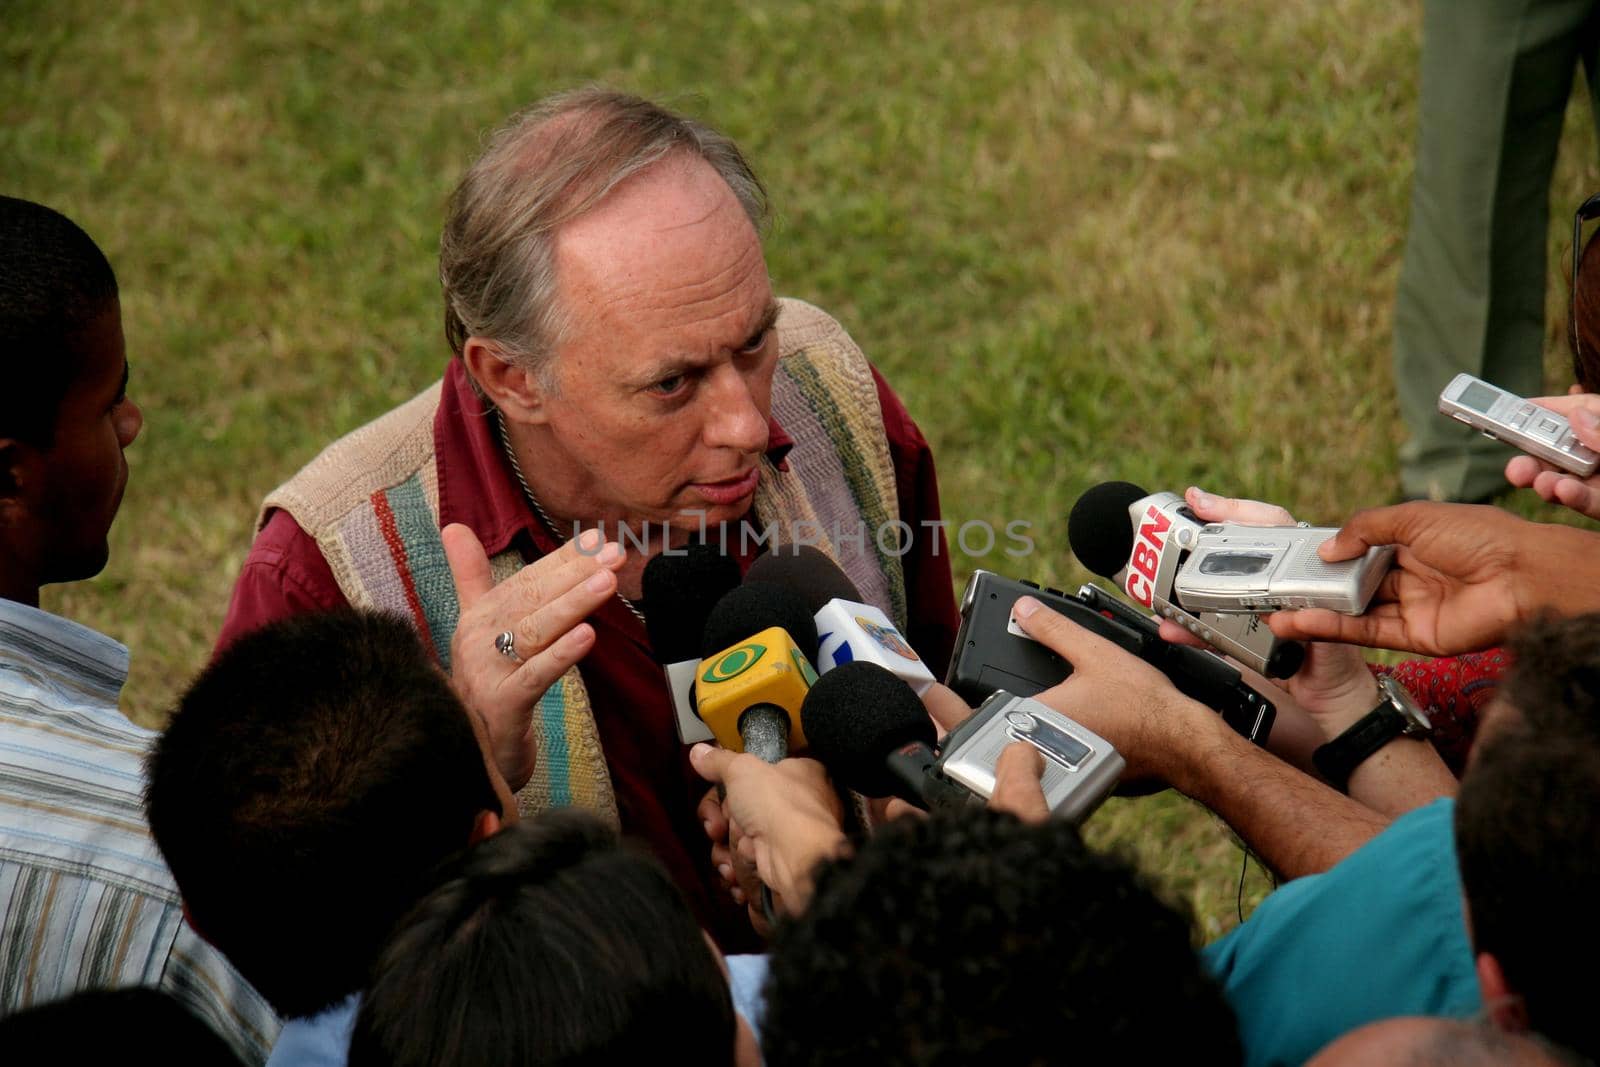 caravelas, bahia / brazil - june 5, 2009: Carlos Minc, Minister of the Environment of President Lula's government, is seen in the city of Caravelas.